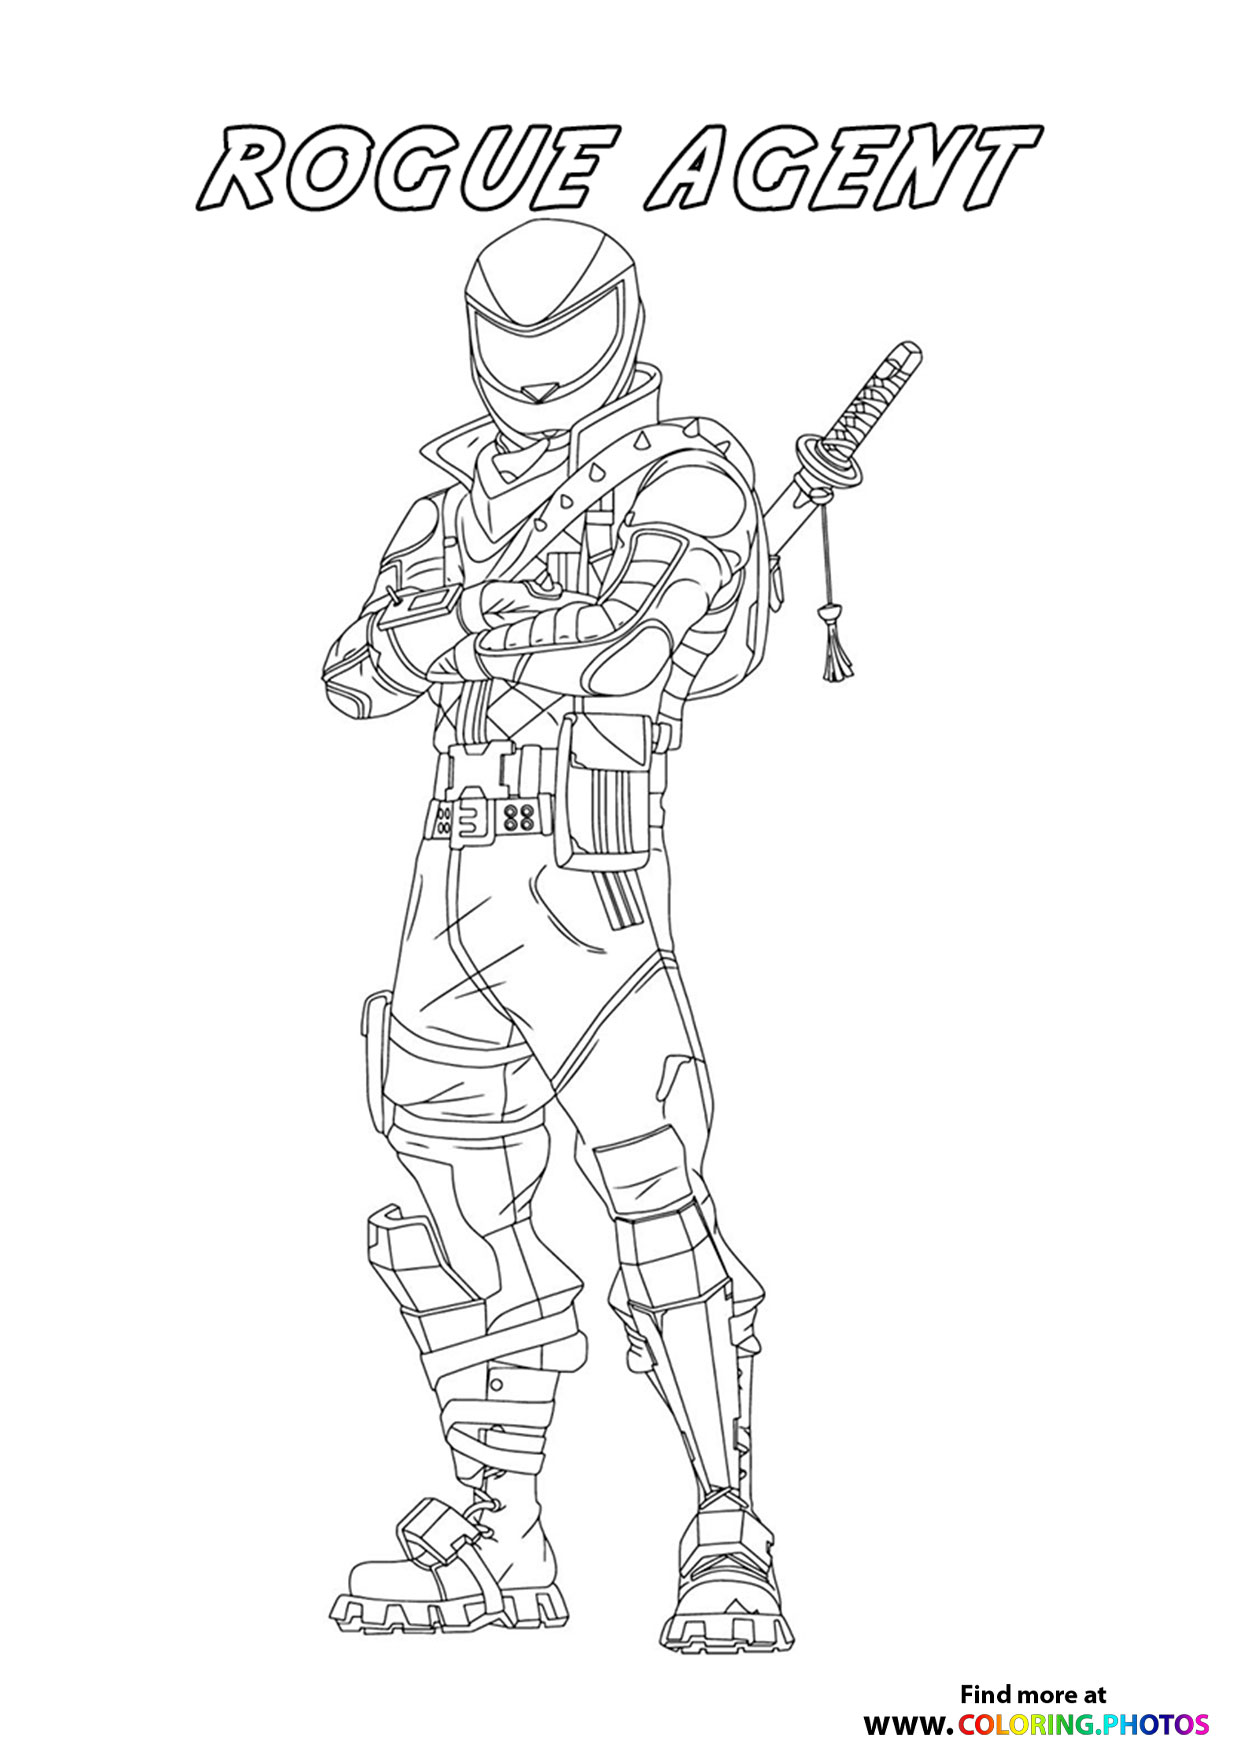 Rogue Agent   Fortnite   Coloring Pages for kids